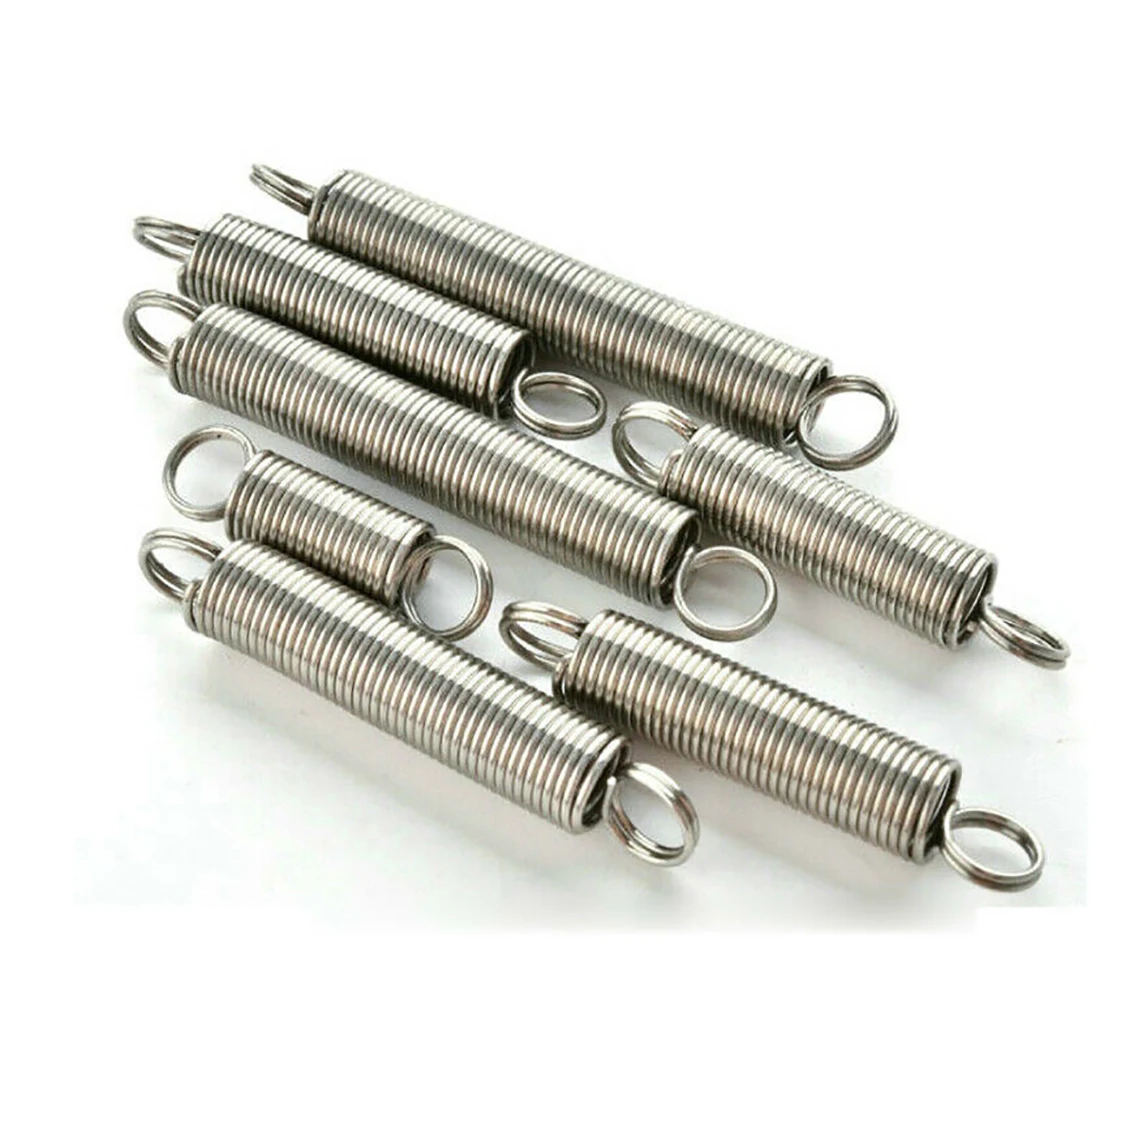 10Pcs 0.5mm Wire Diameter 5/6mm OD Stainless Steel Compression Pressure Spring 